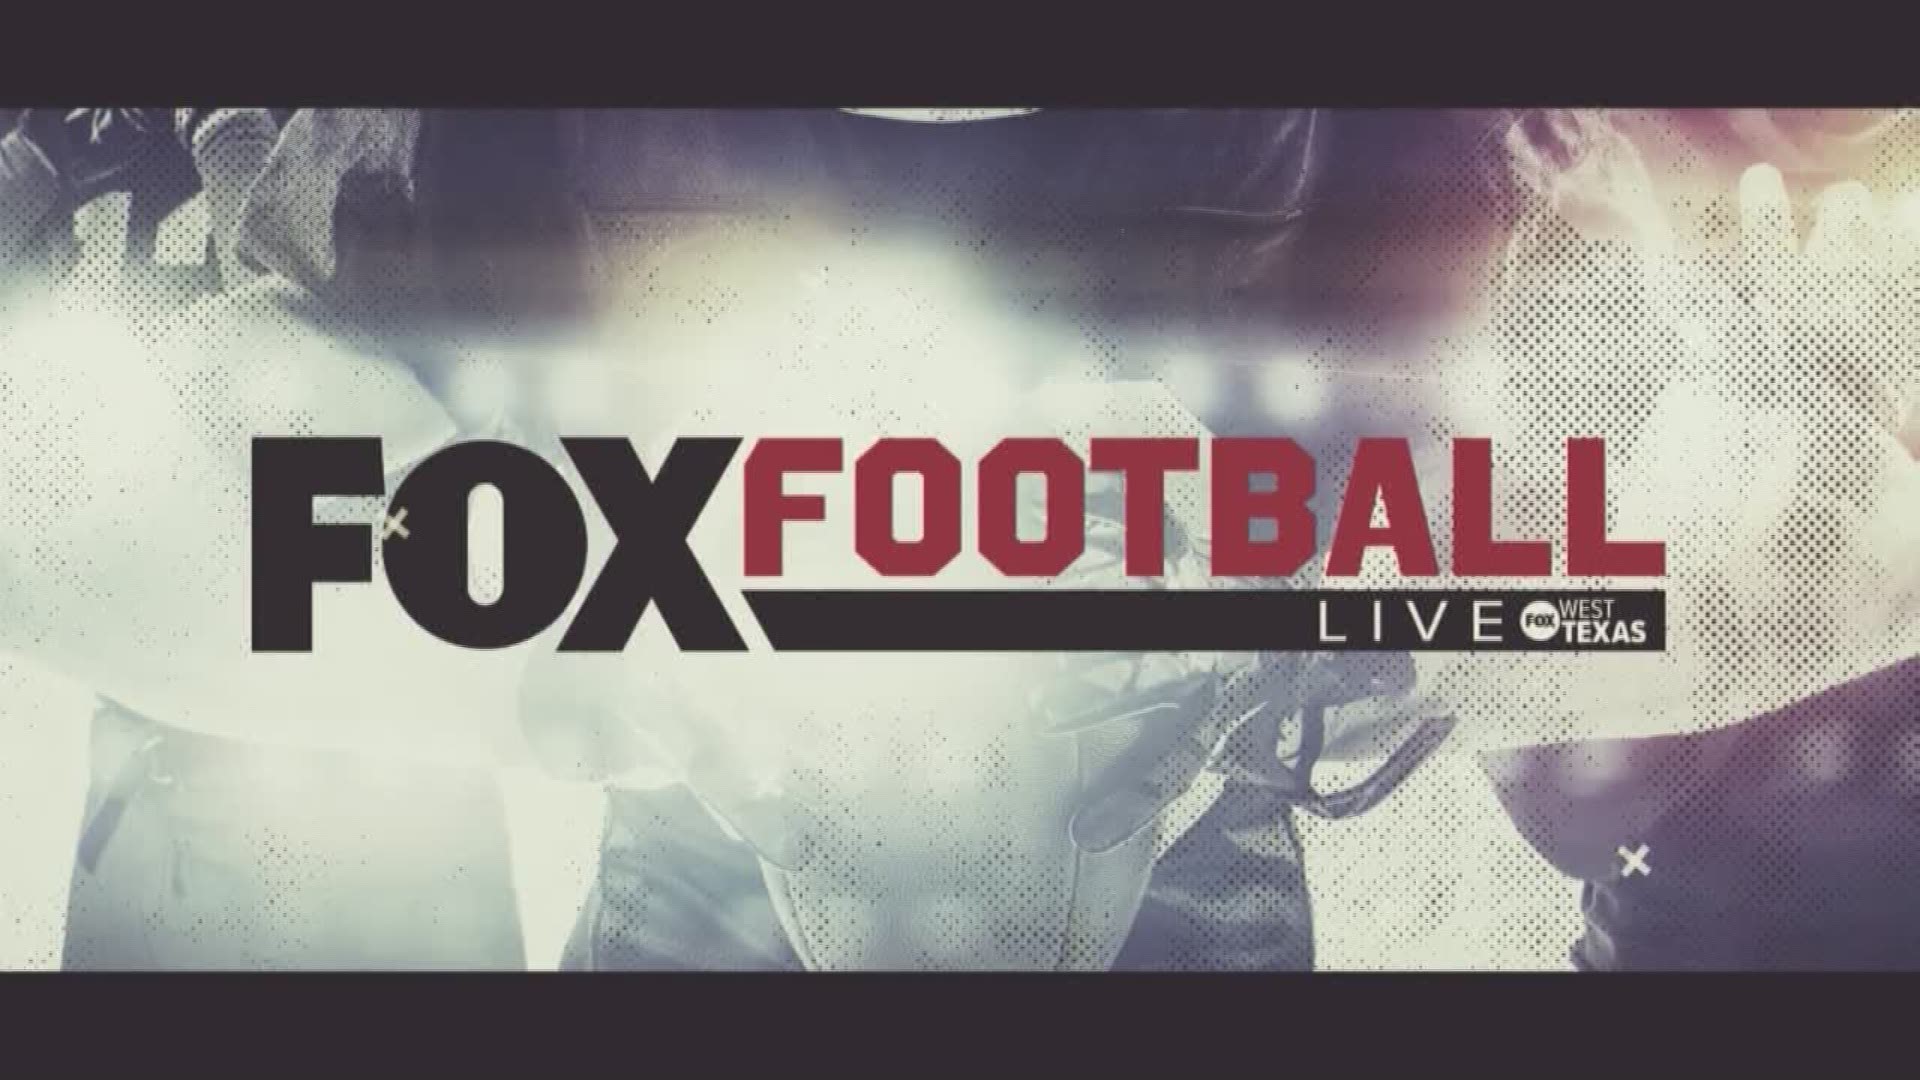 FOX Football Live for Friday, Nov. 20 - highlights, sights and sounds from West Texas football games.